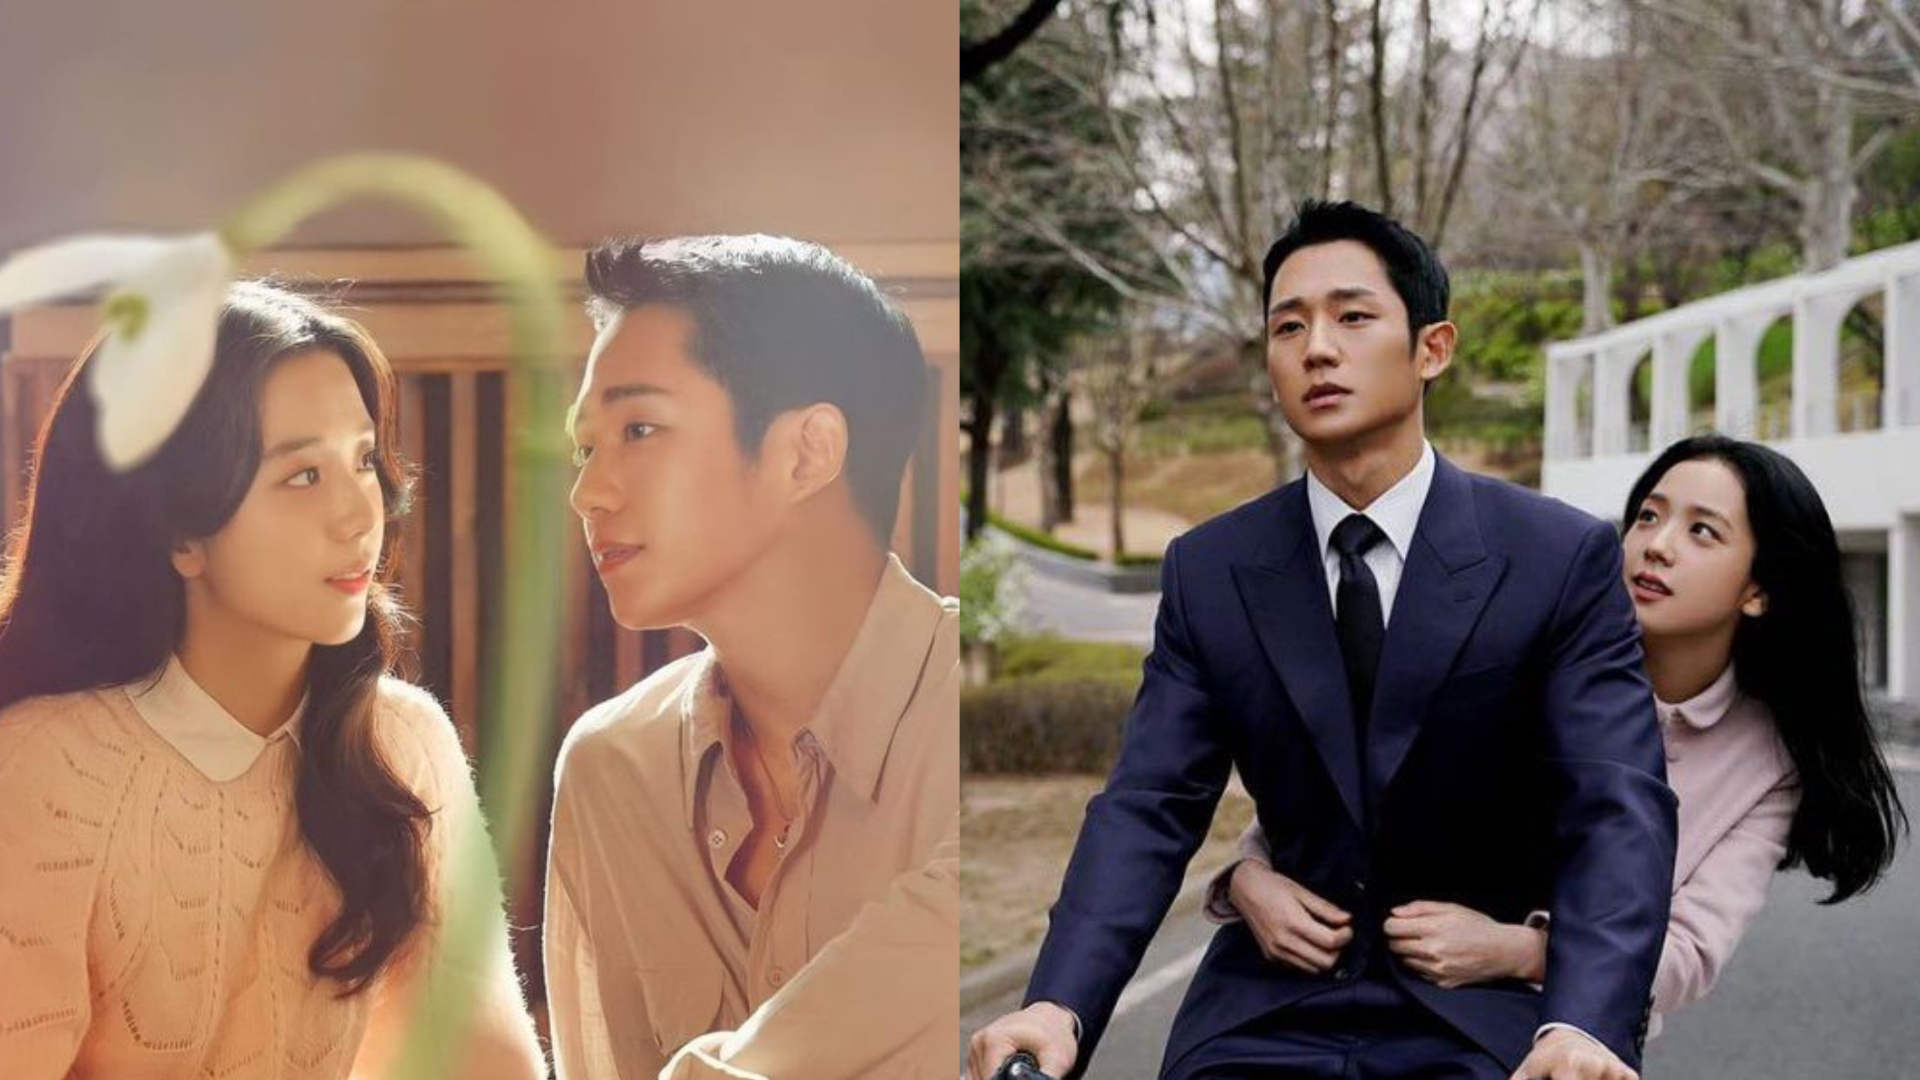 Jung Hae-in and Jisoo from Snowdrop